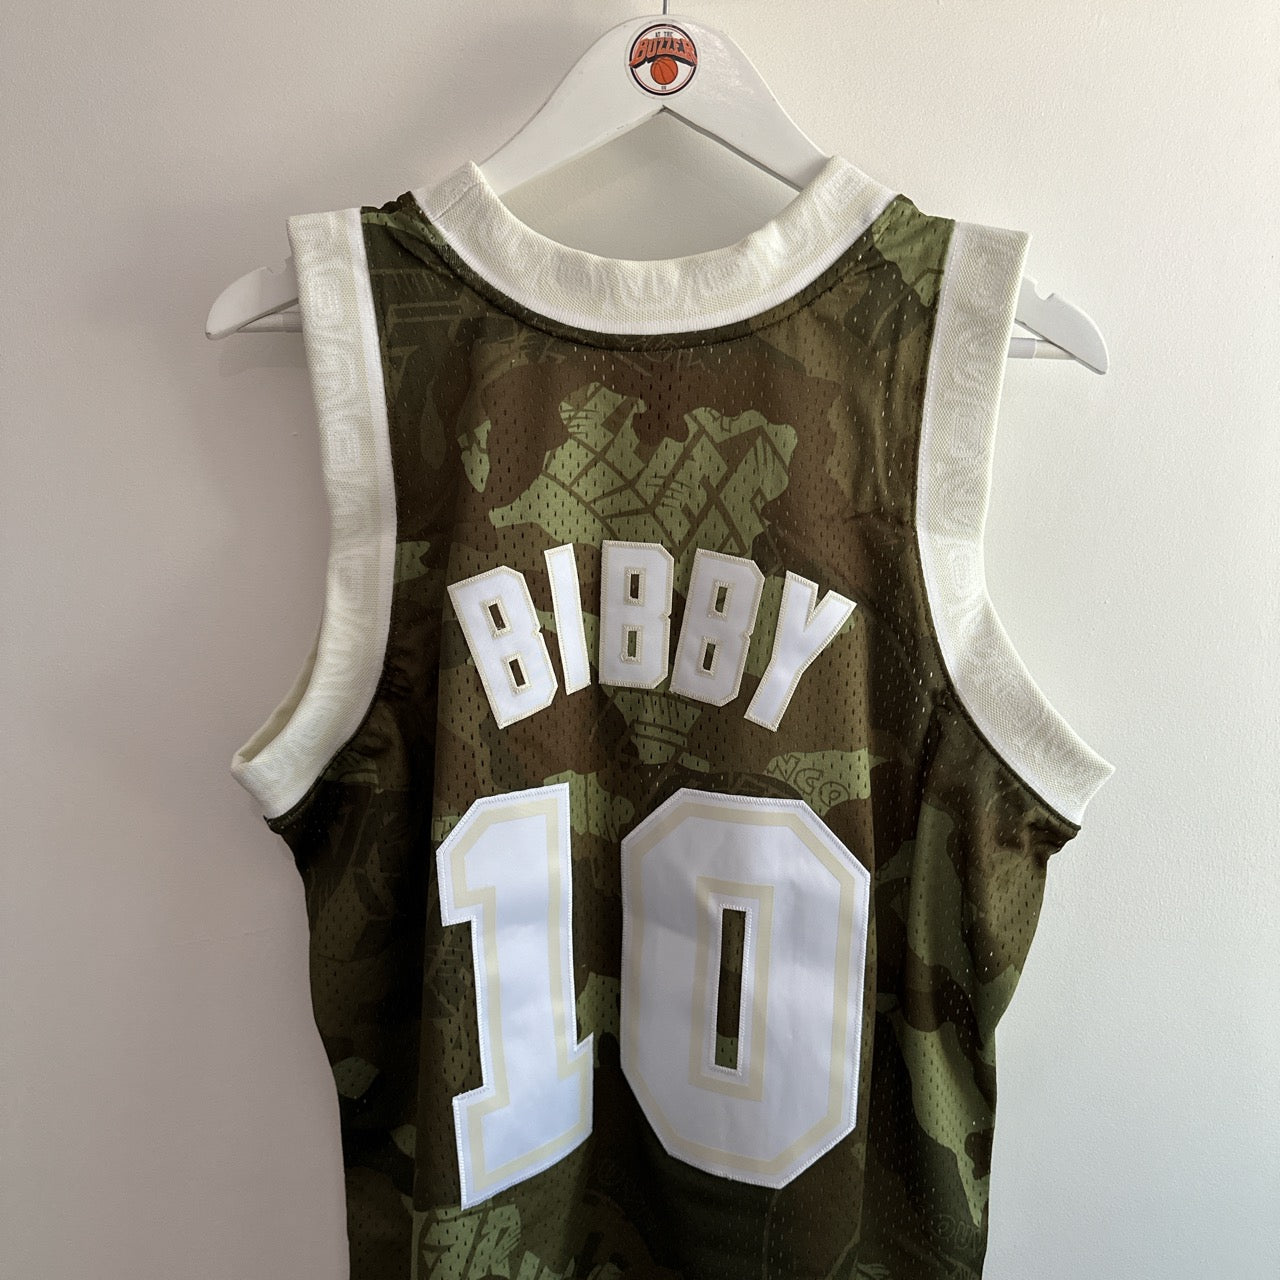 Vancouver Grizzles Mike Bibby swingman jersey - Mitchell & Ness (Large) - At the buzzer UK